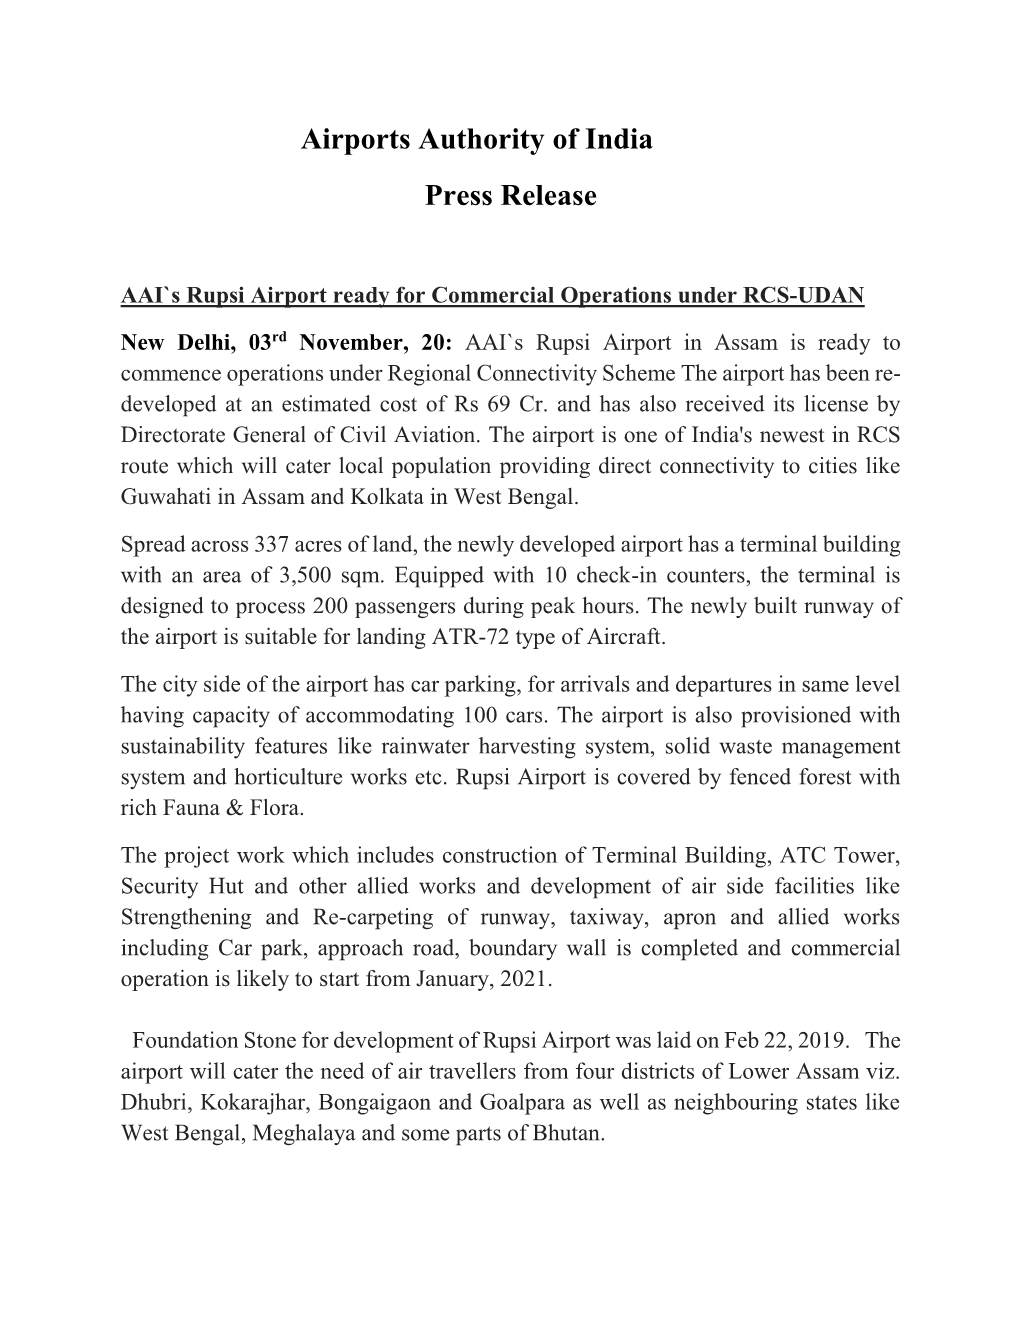 Airports Authority of India Press Release